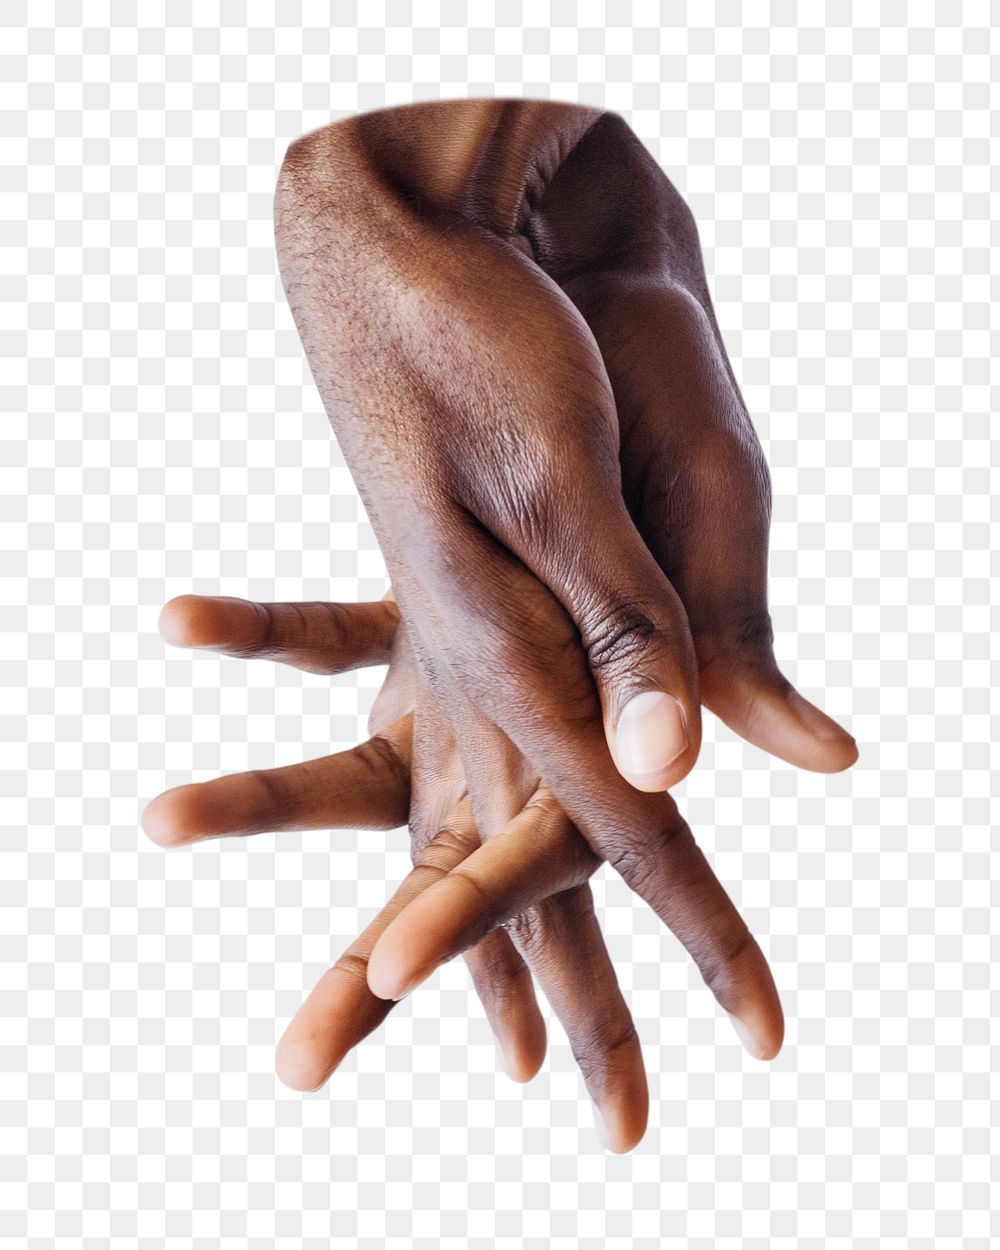 Clasping hands png gesture, transparent background